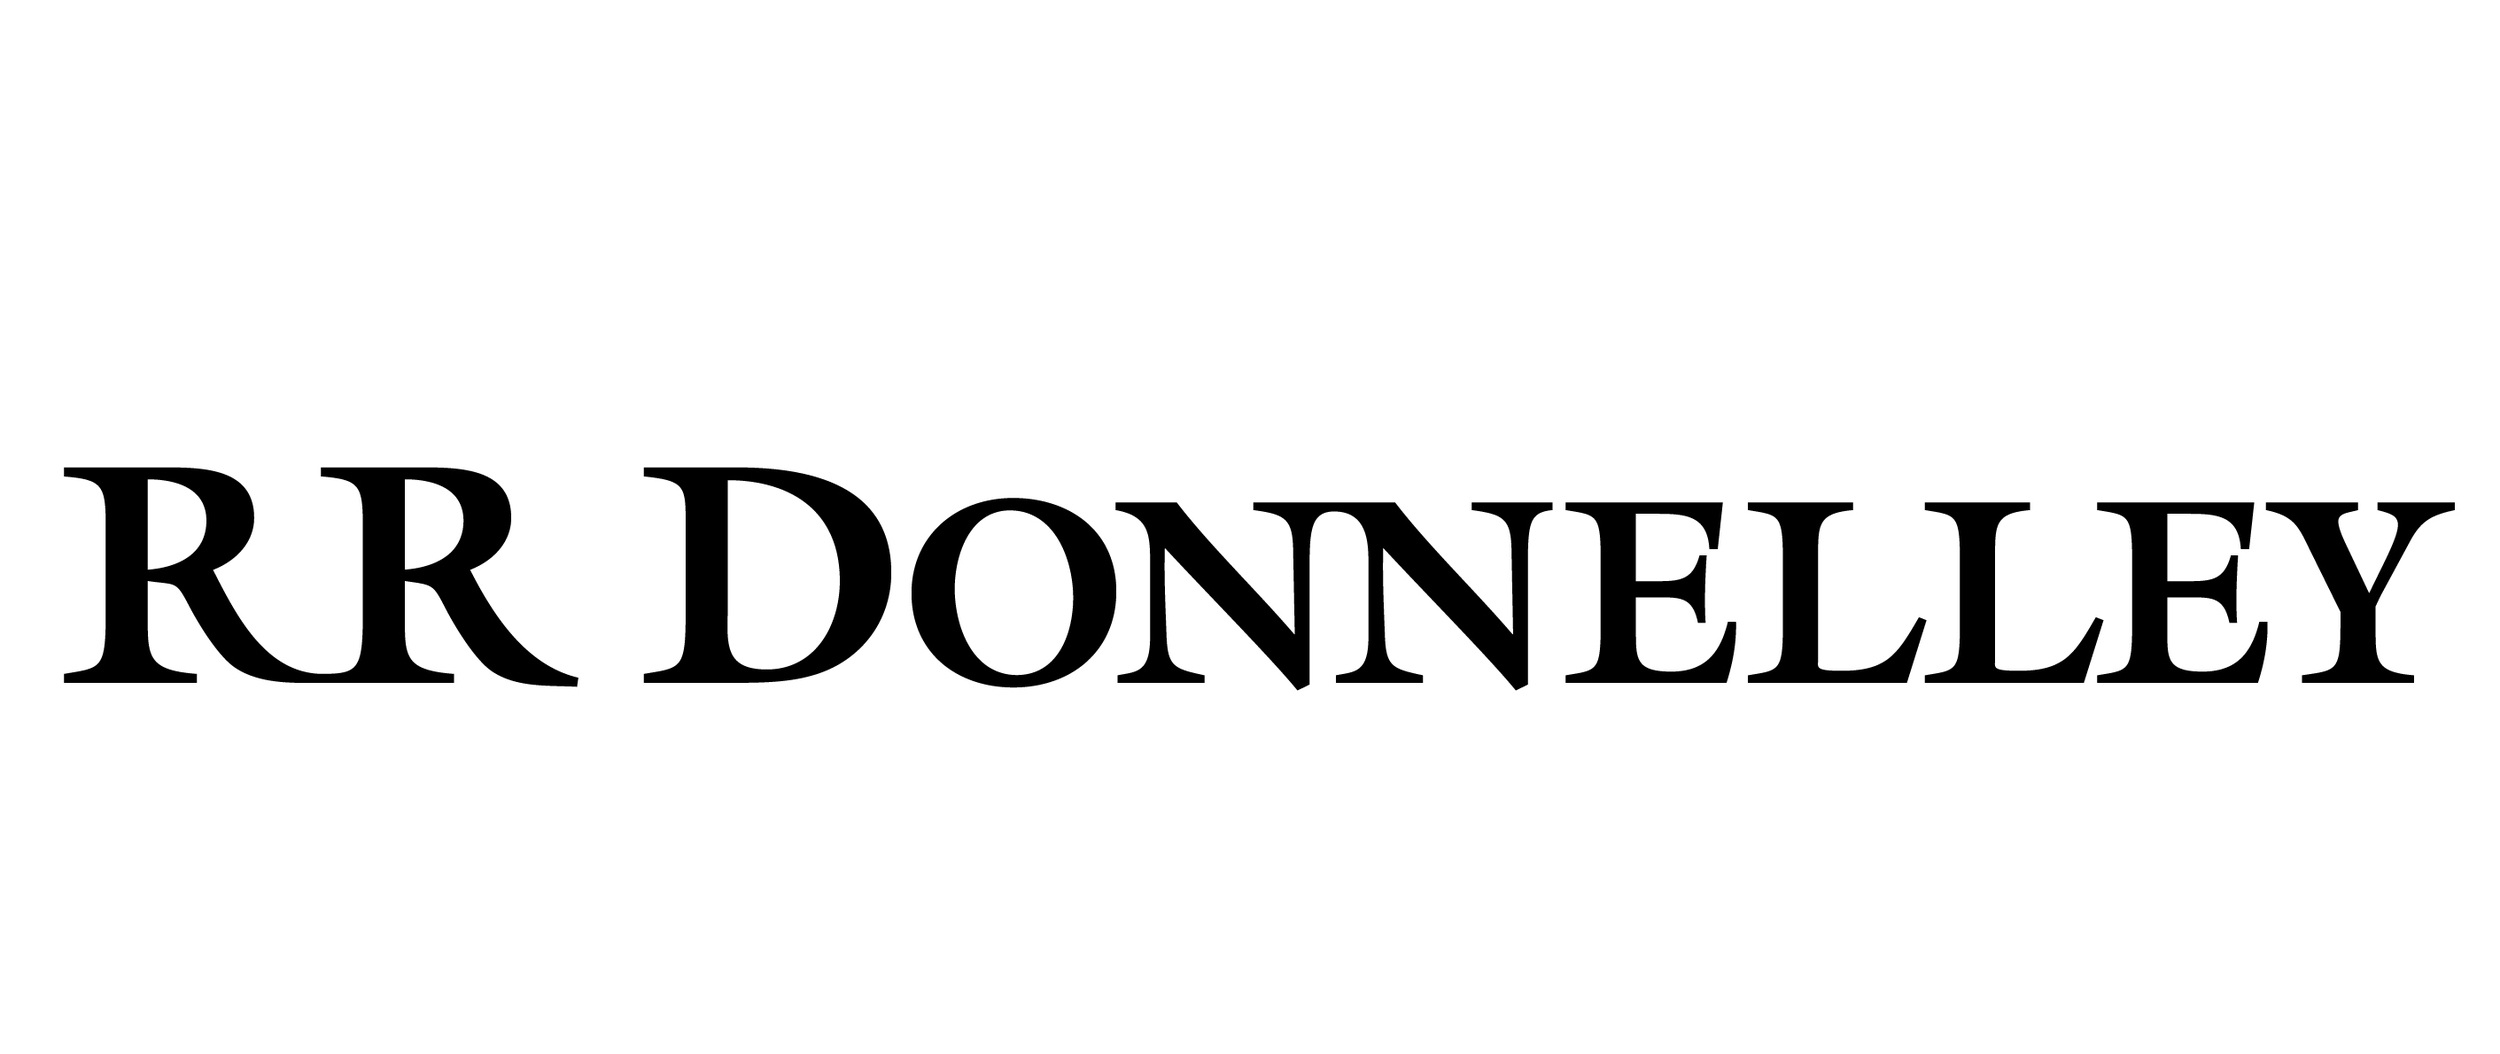 rr-donnelley-sons-company-logo.jpg